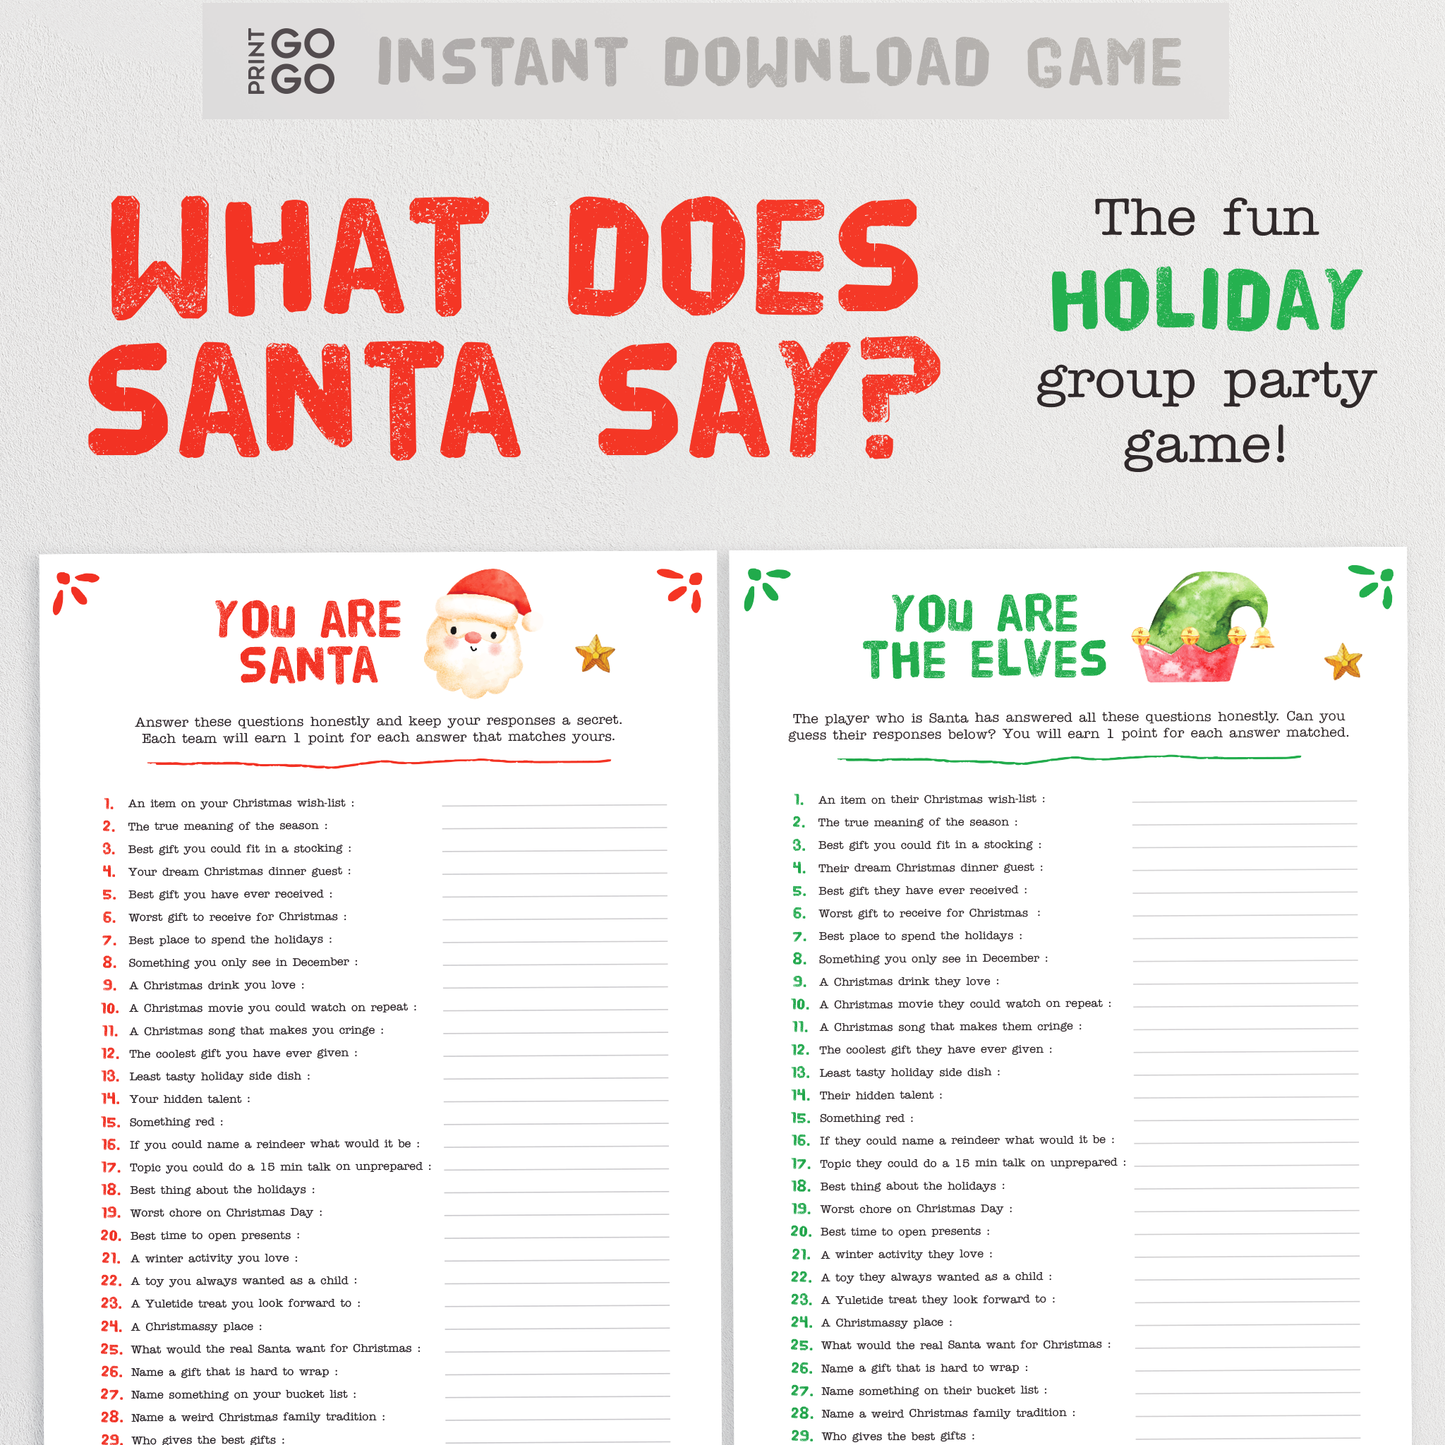 What Does Santa Say? - Group Holiday Party Game